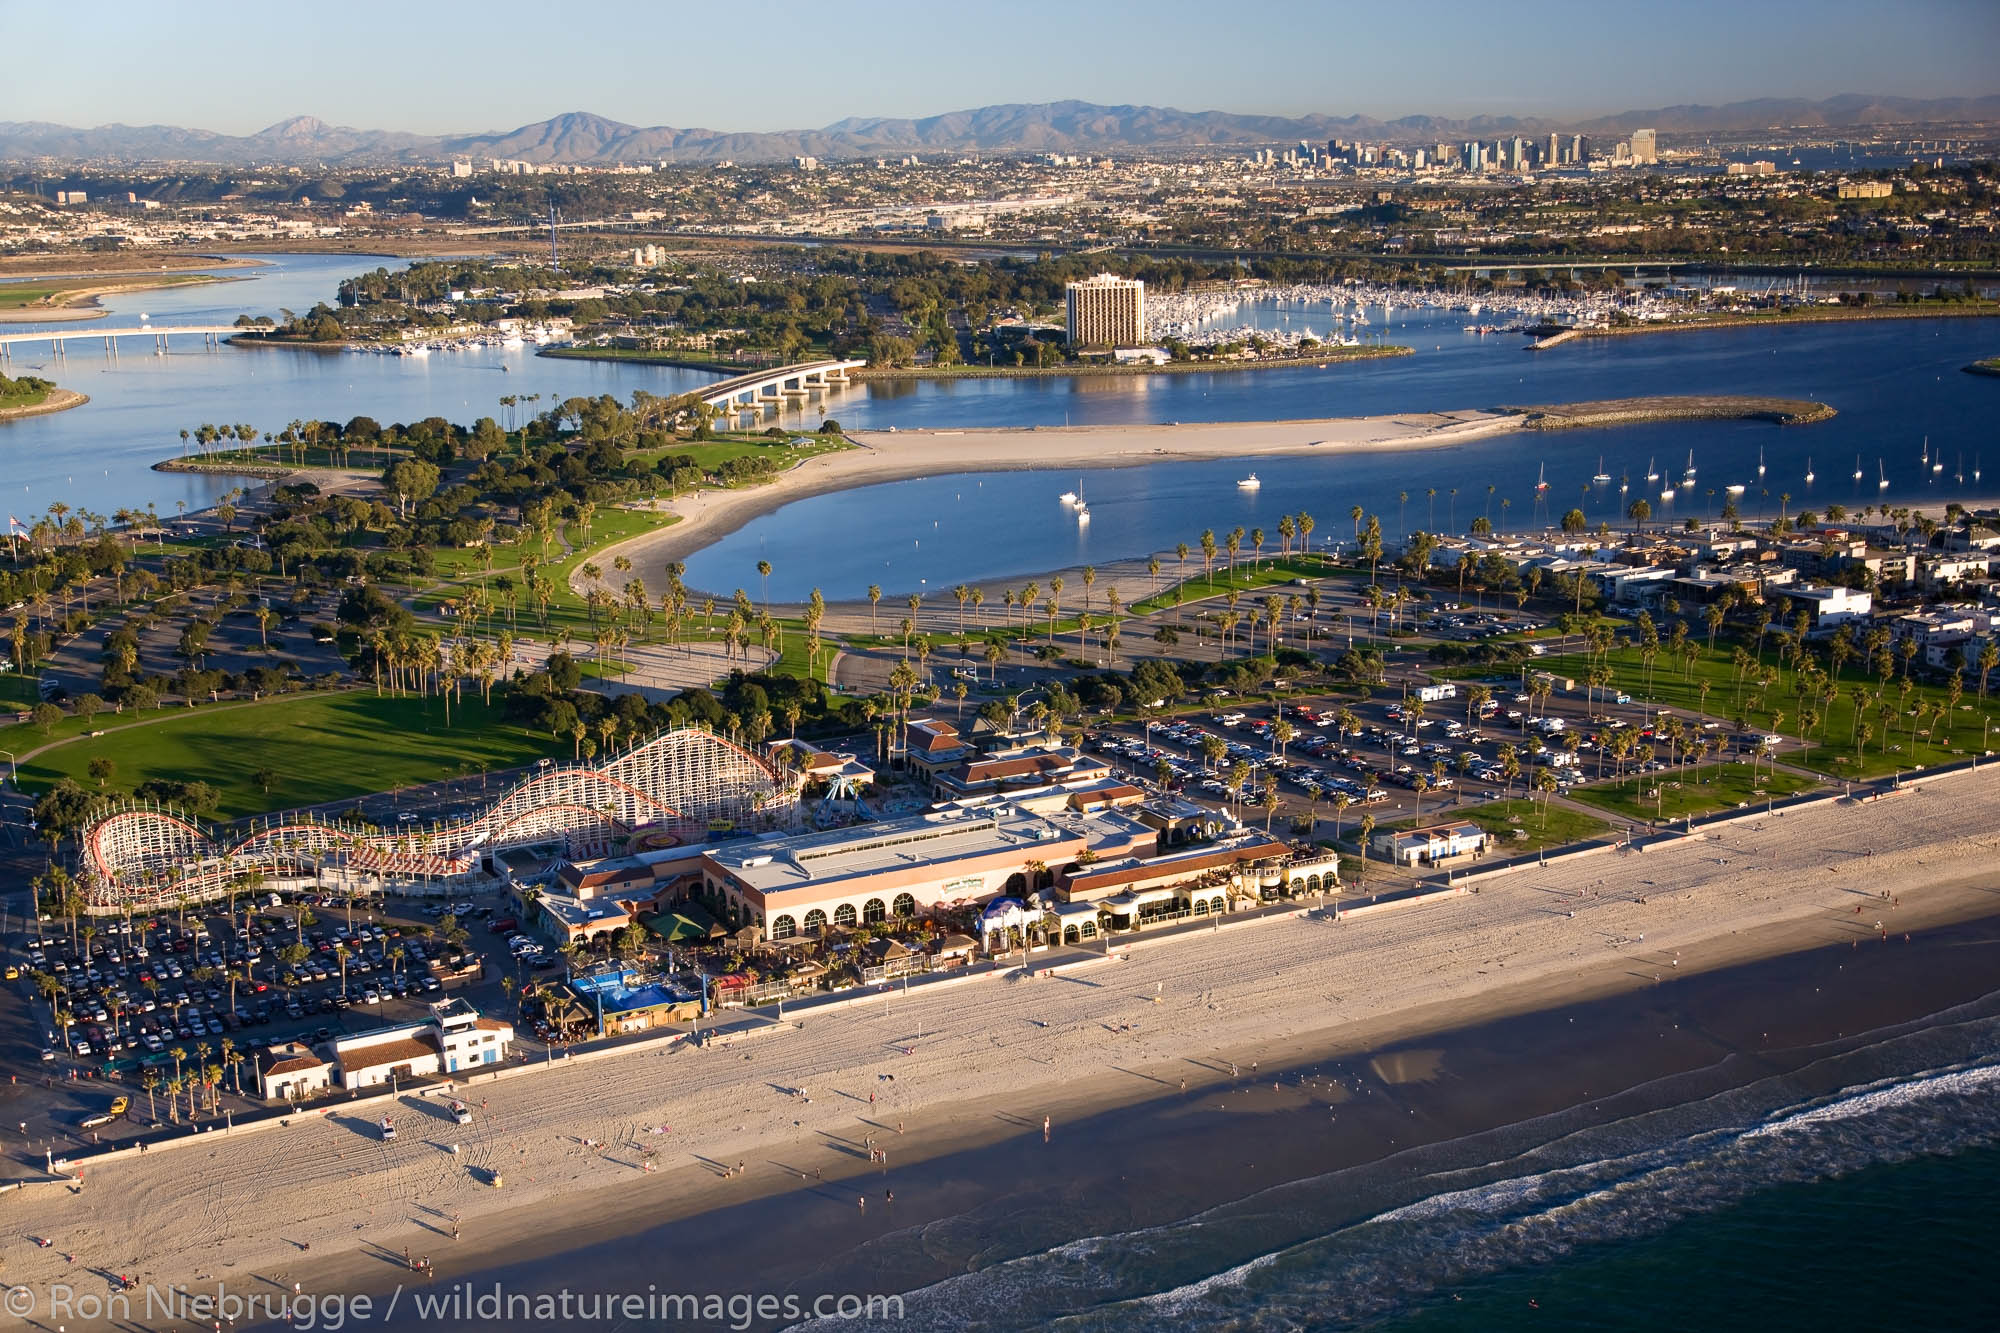 Roller Coaster at Mission Beach and Mission Bay, San Diego, California.